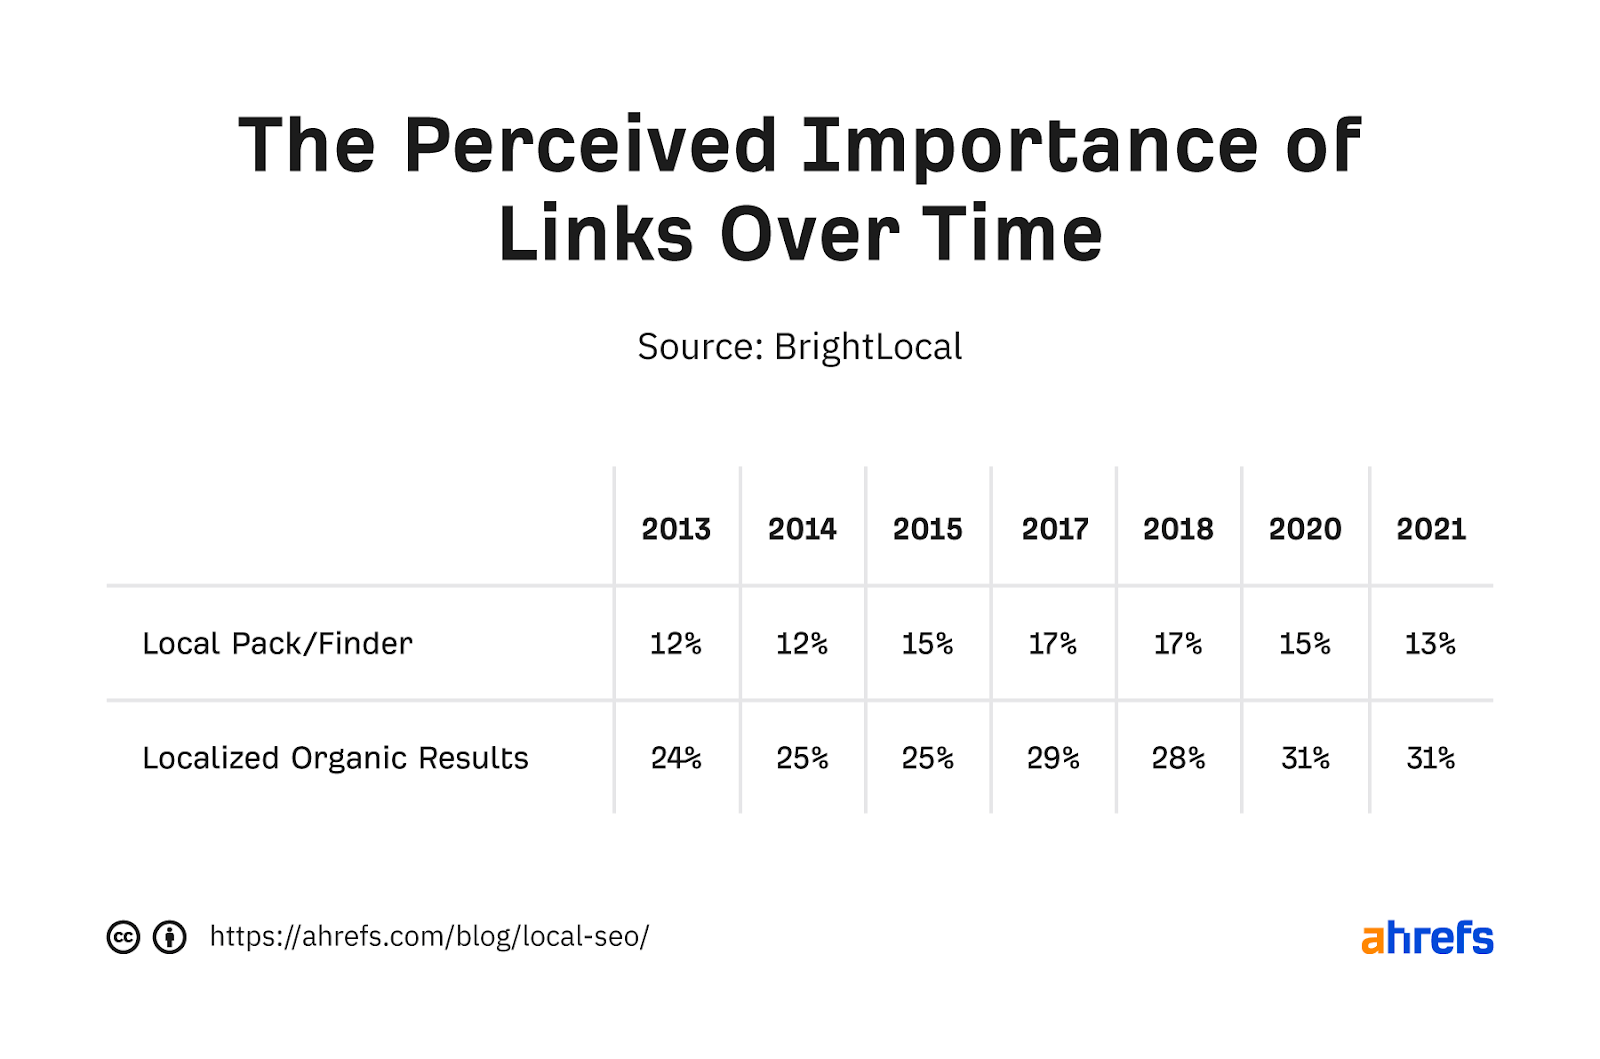 Links perceived importance over time